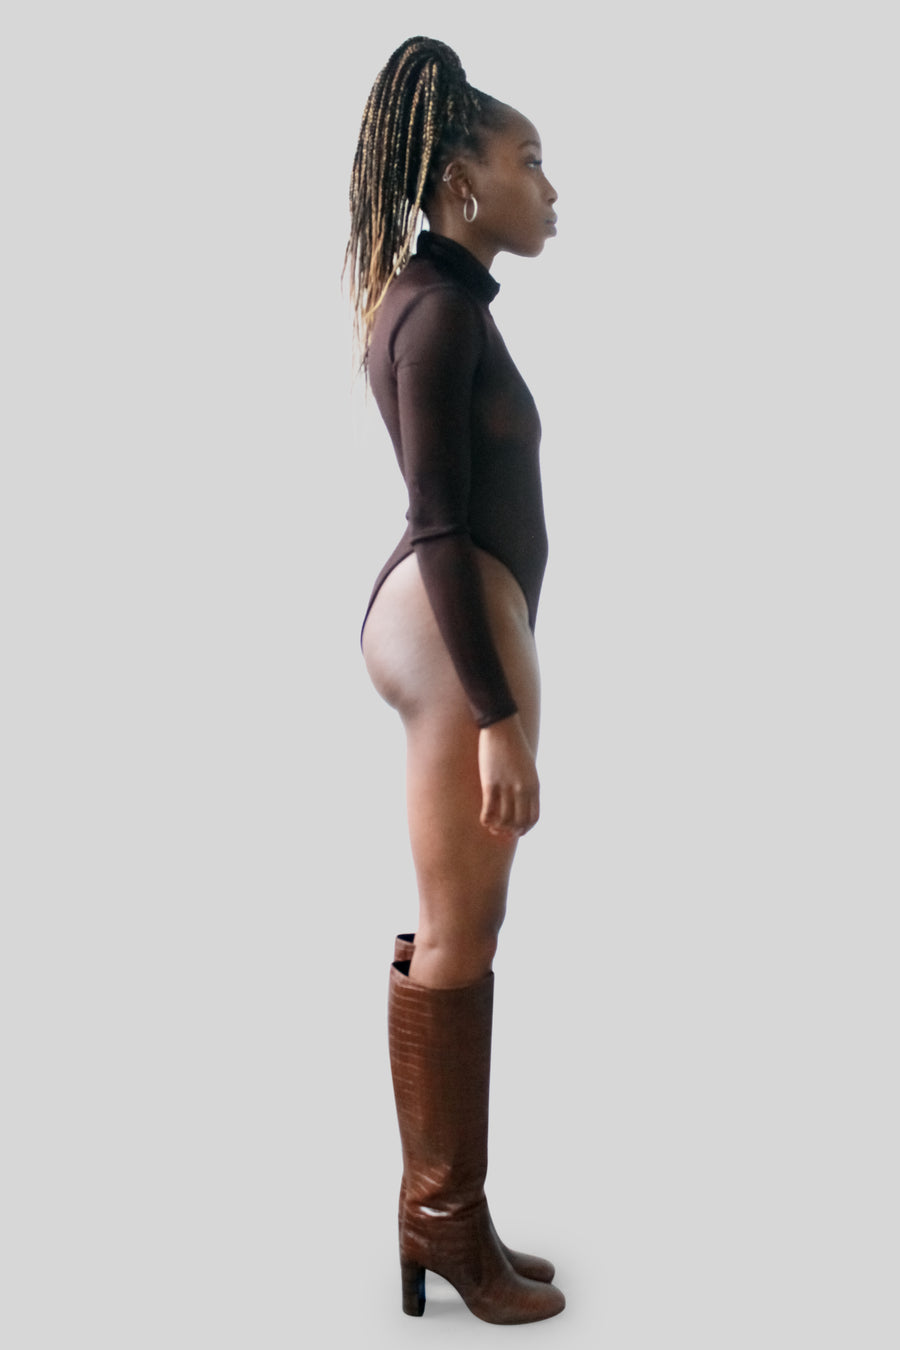 The Reese Bodysuit in Chocolate